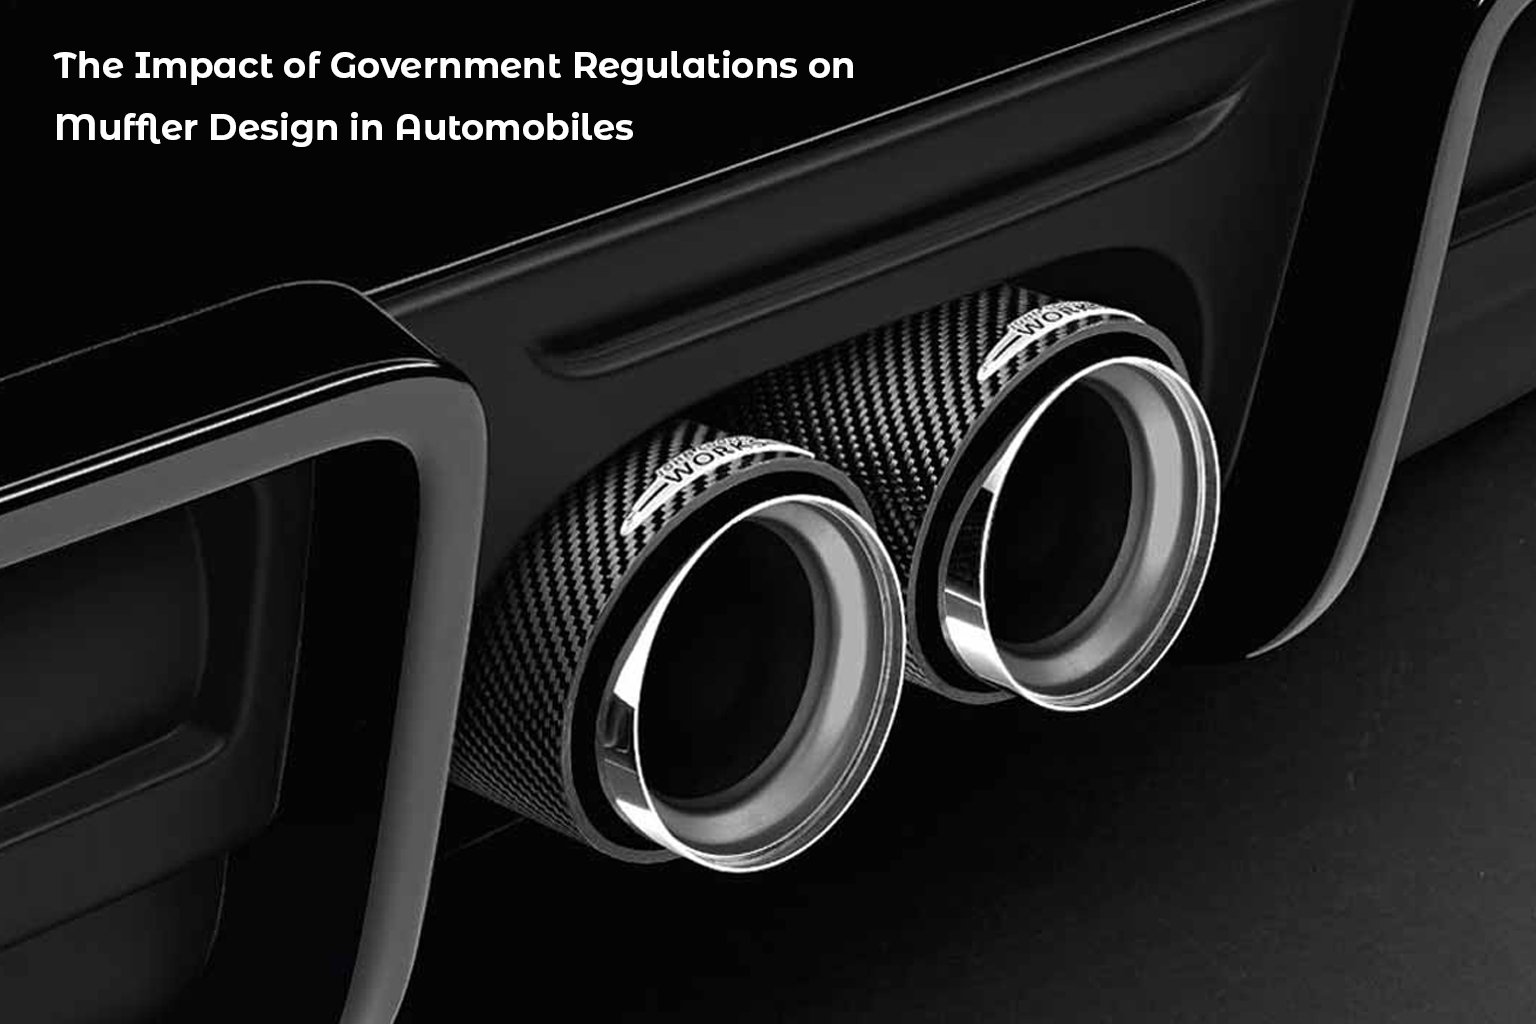 The Impact of Government Regulations on Muffler Design in Automobiles